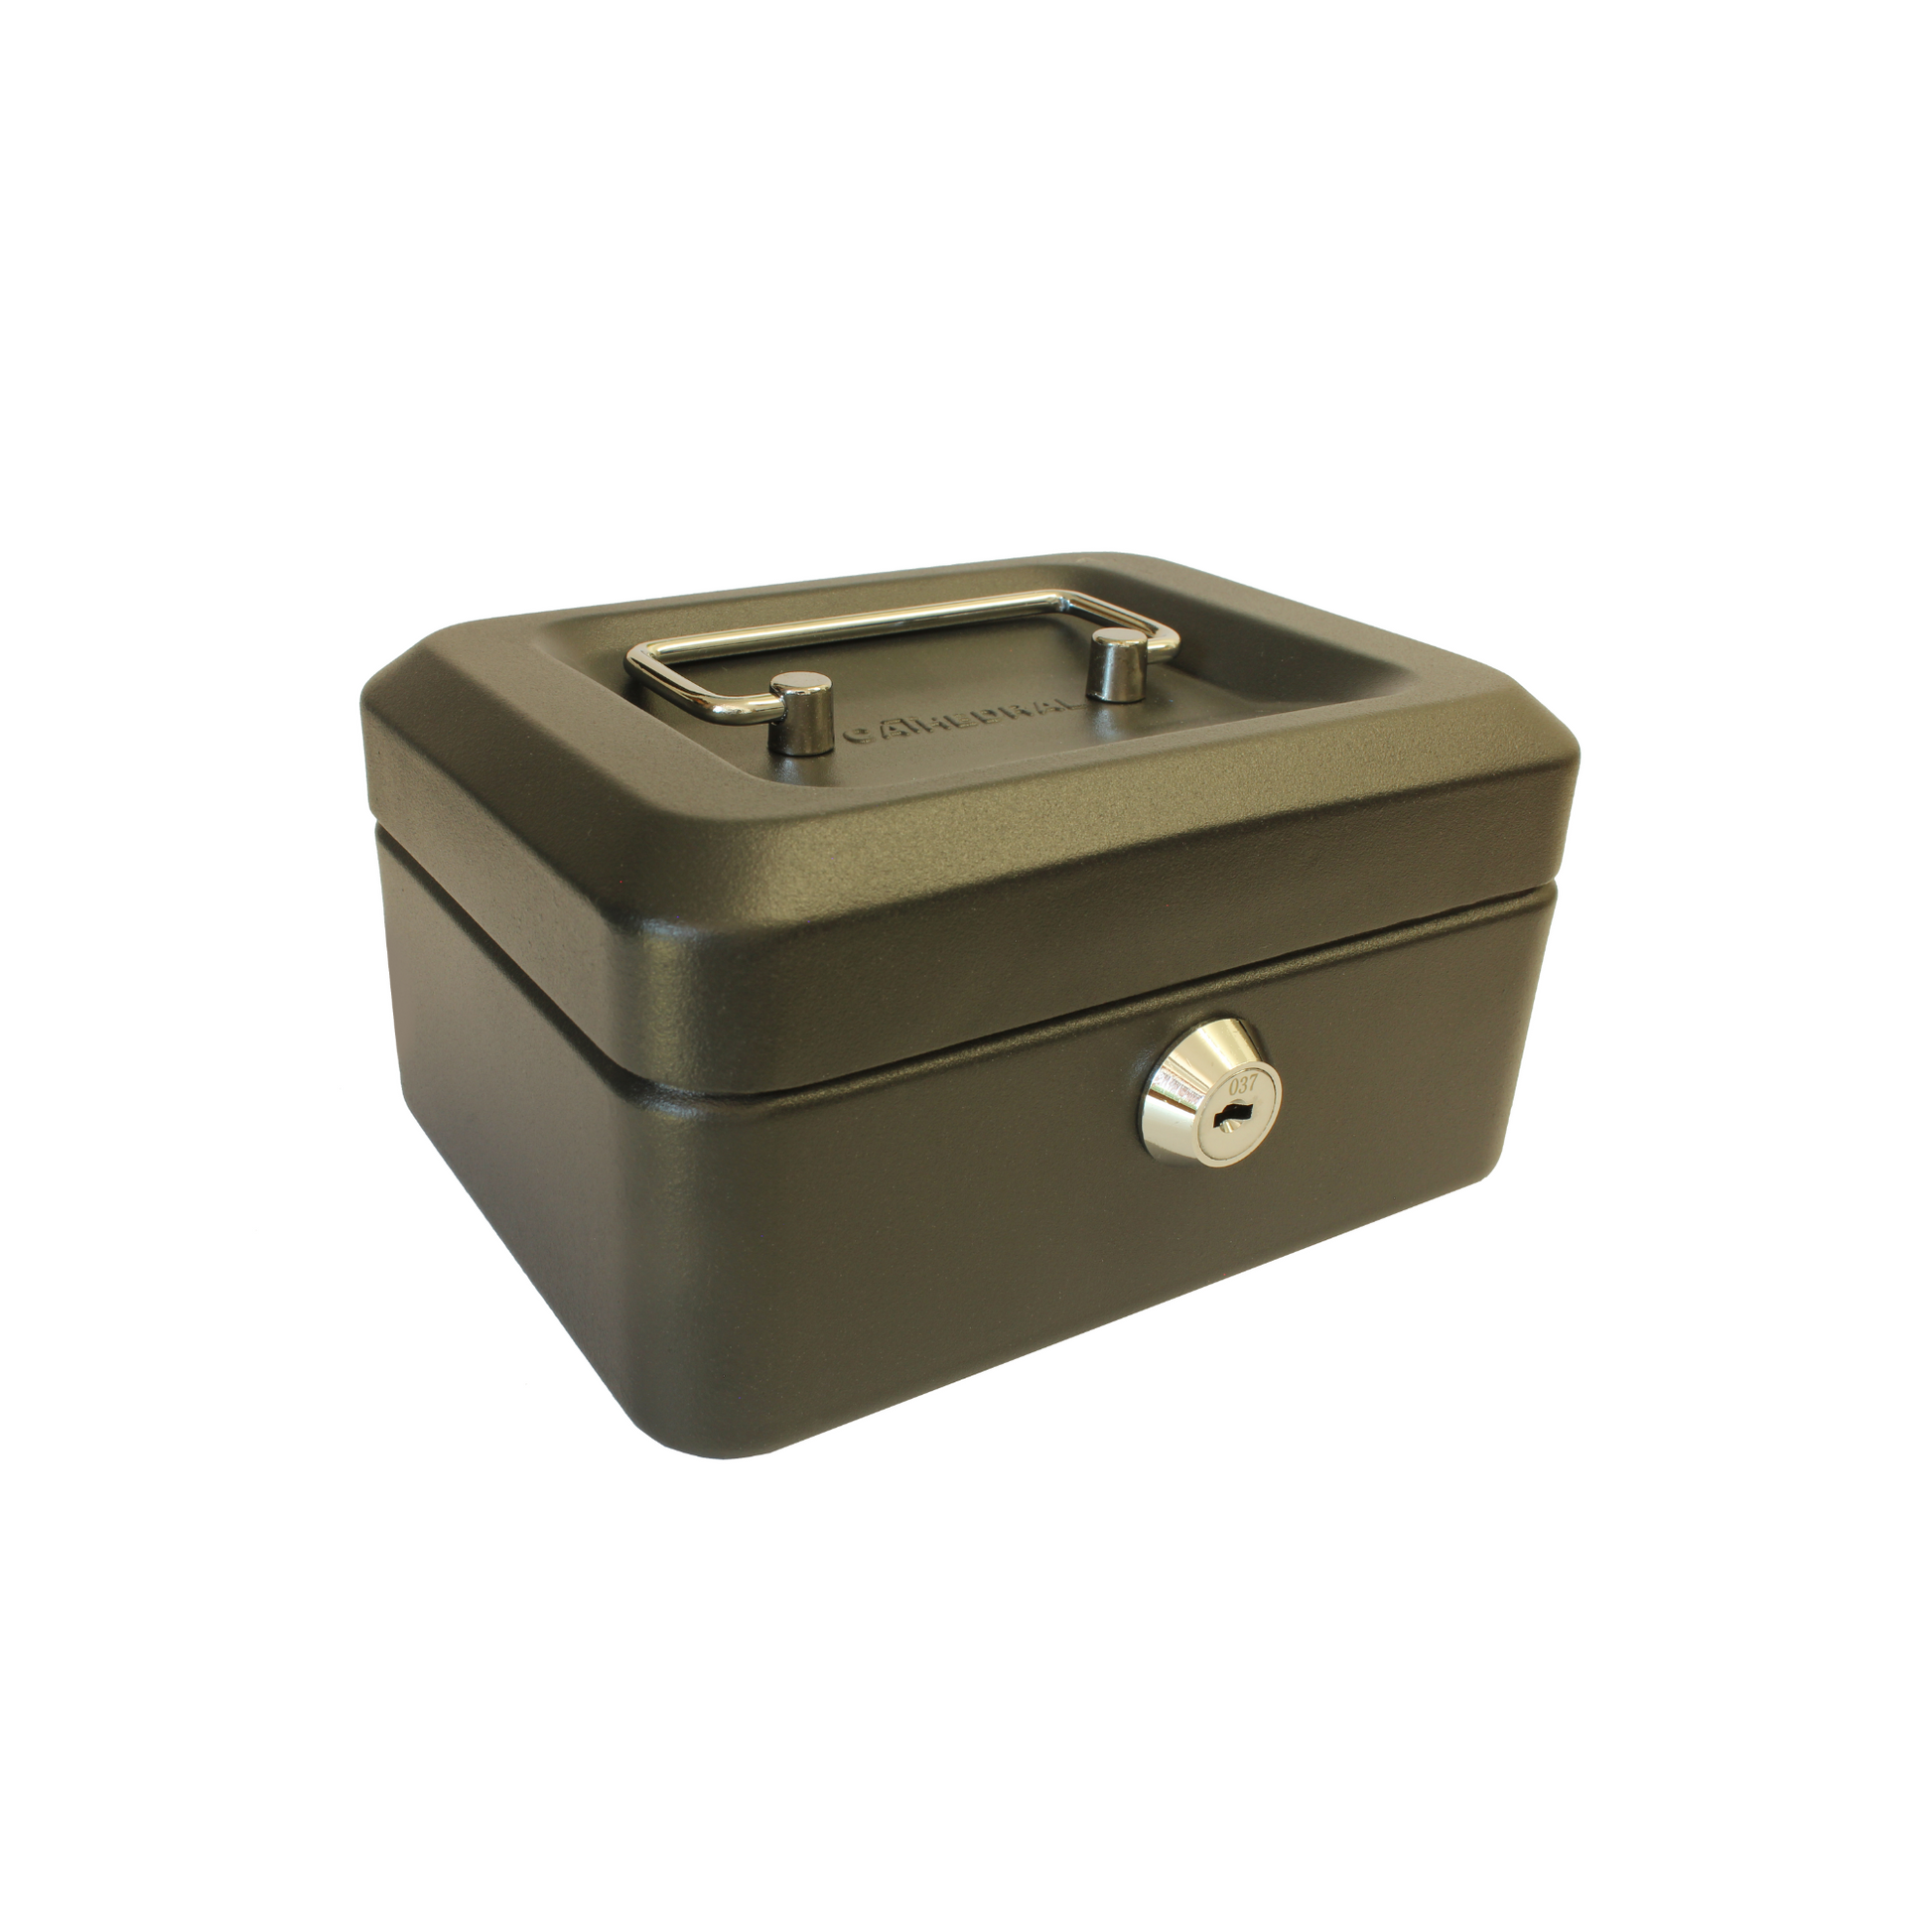 A closed matte black 6-inch key lockable cash box. The box features a sturdy metal handle and a secure lock at the front for safekeeping of cash and coins.